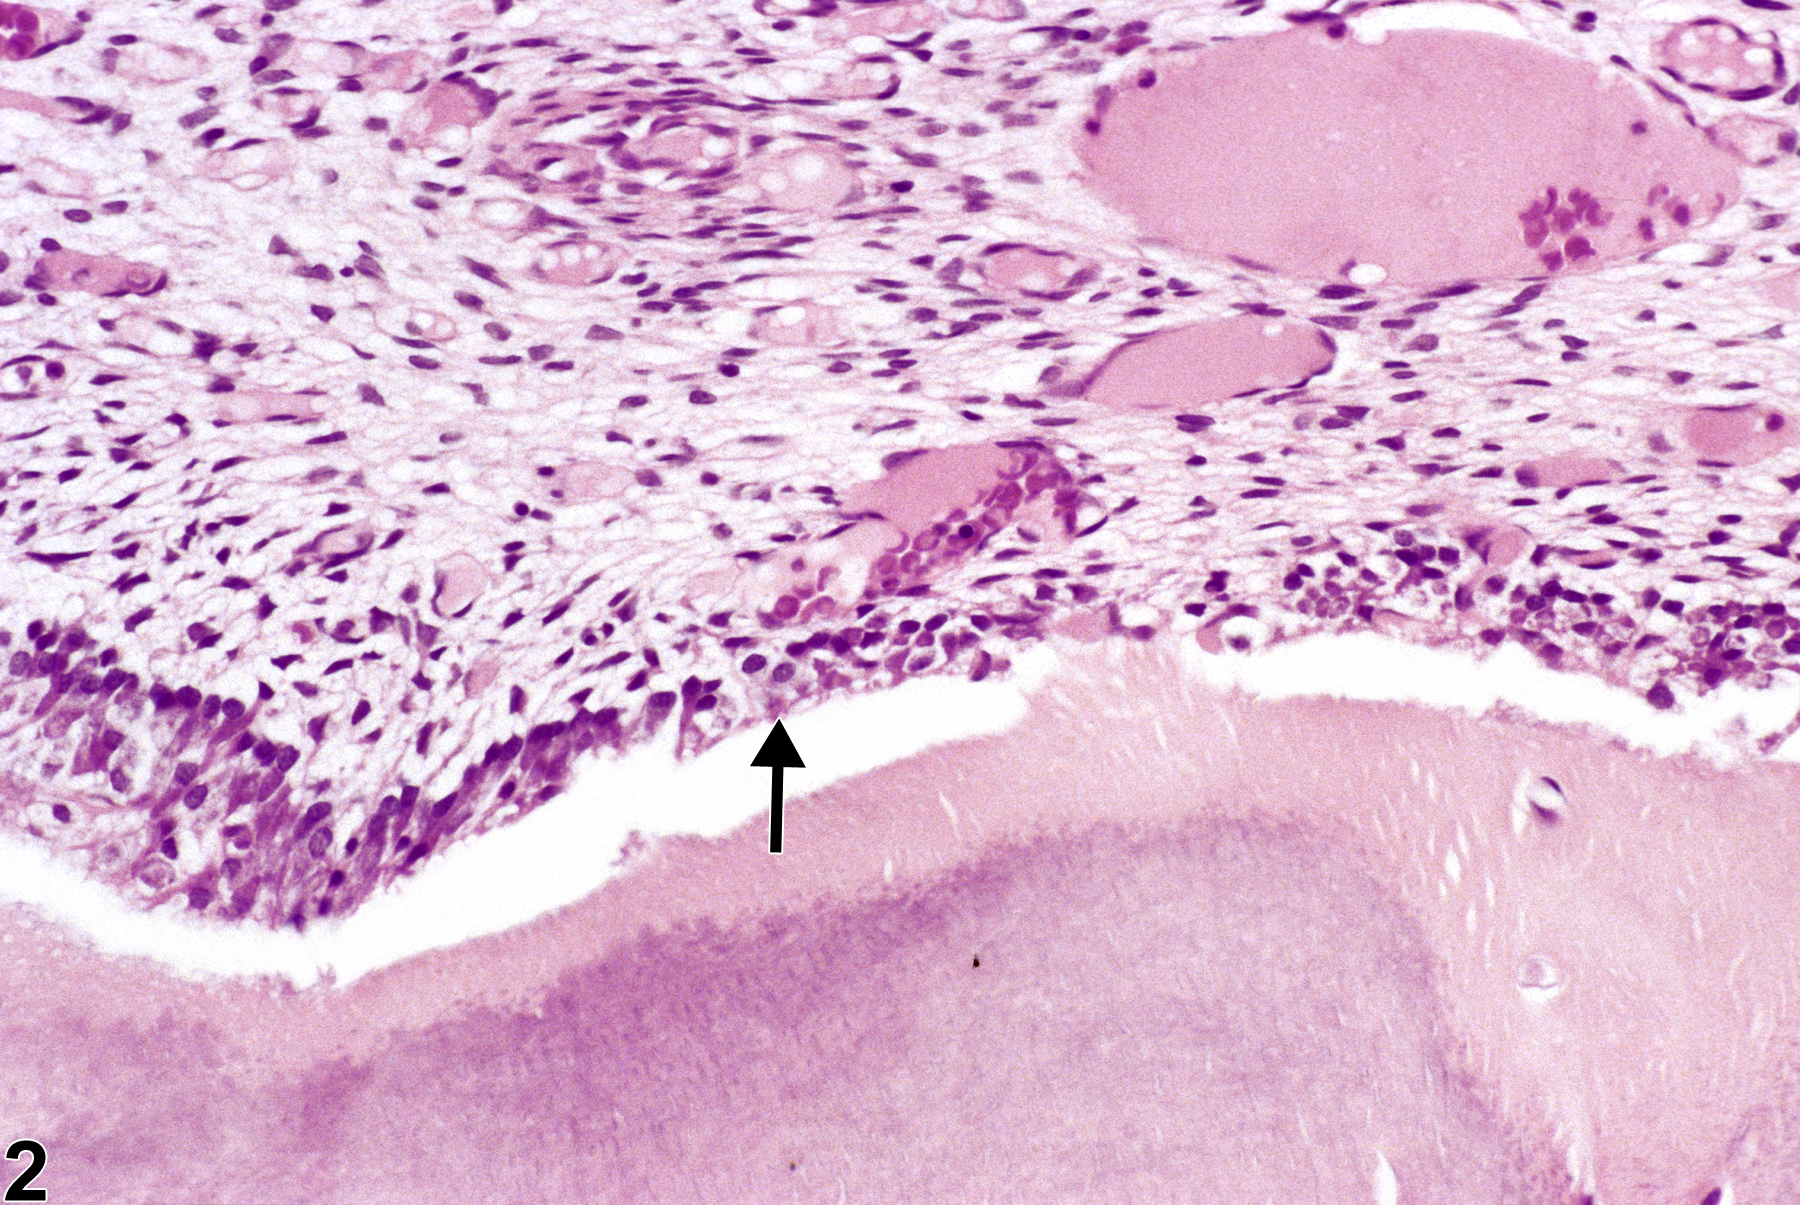 Image of degeneration in the tooth from a male F344/N rat in a chronic study